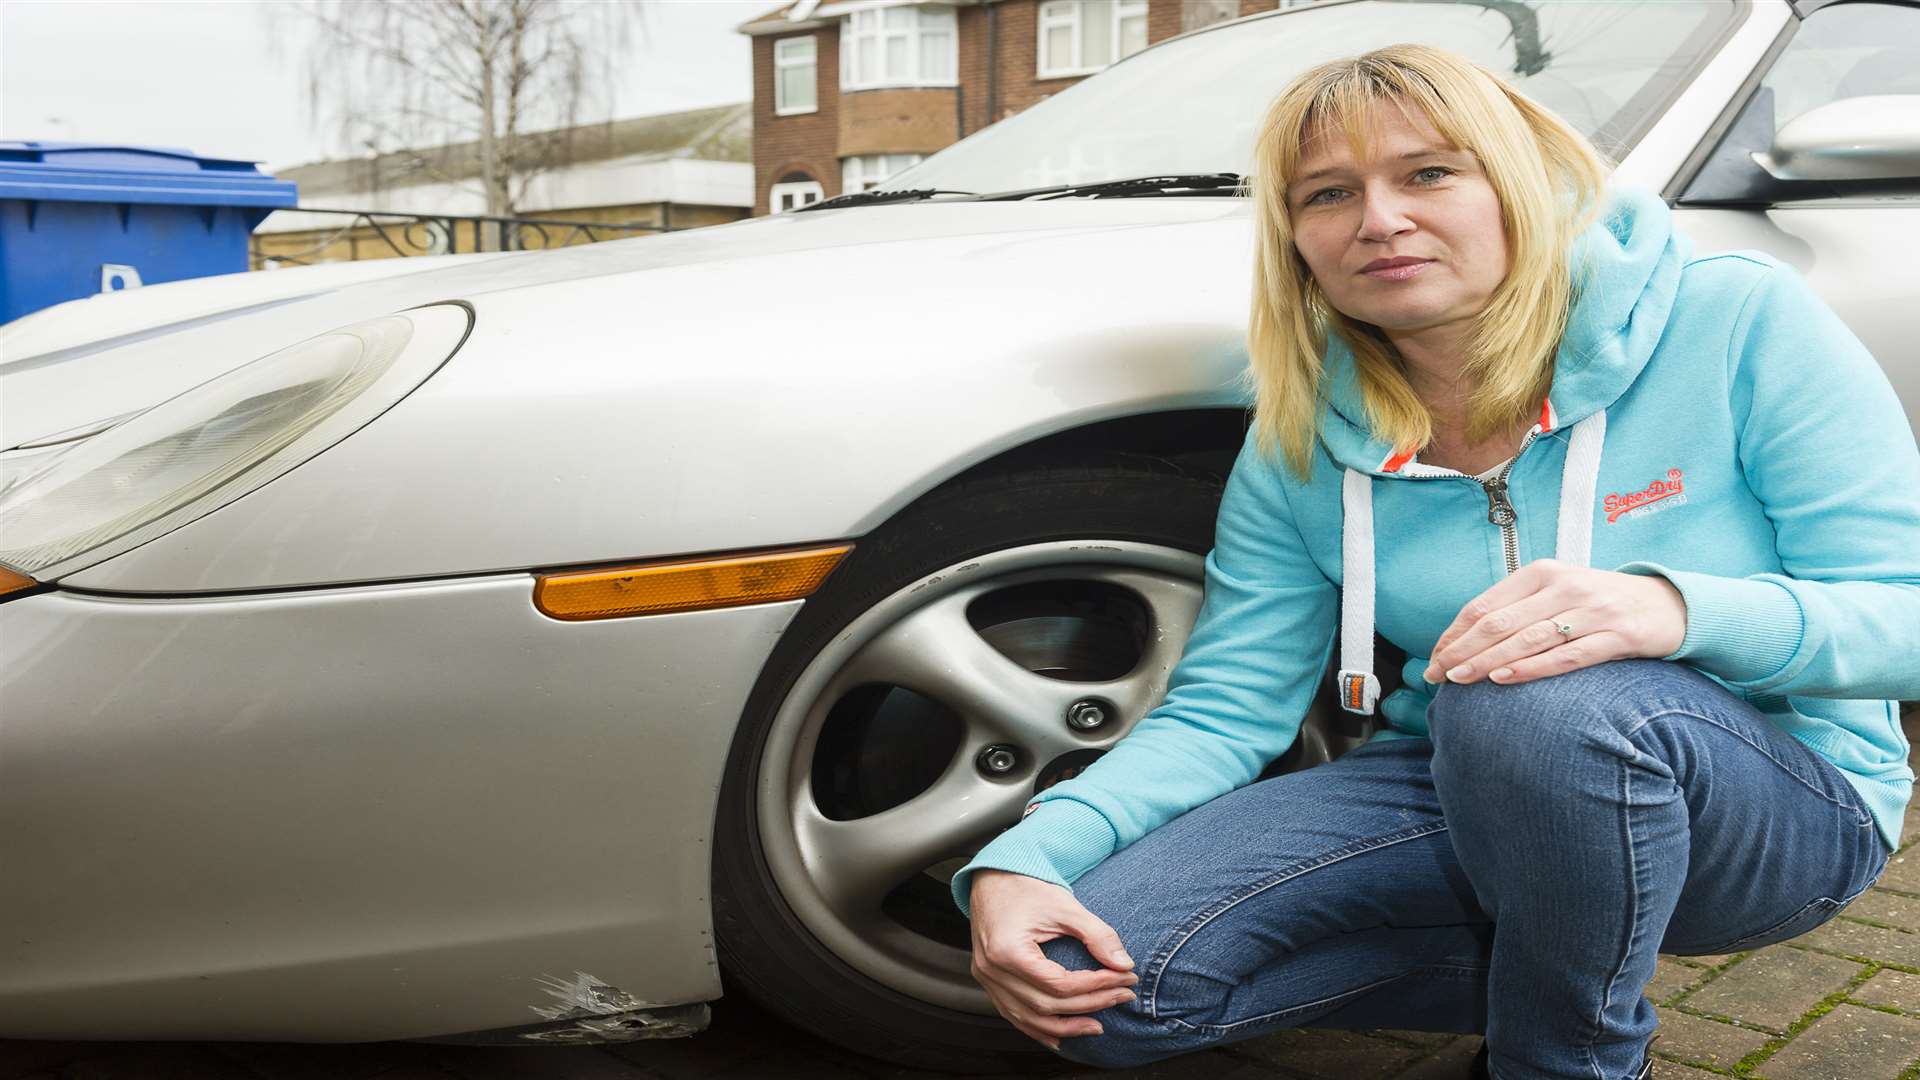 Helen Davy with the family's 1997 Porsche Boxter, damaged by a brick thrown by youths.